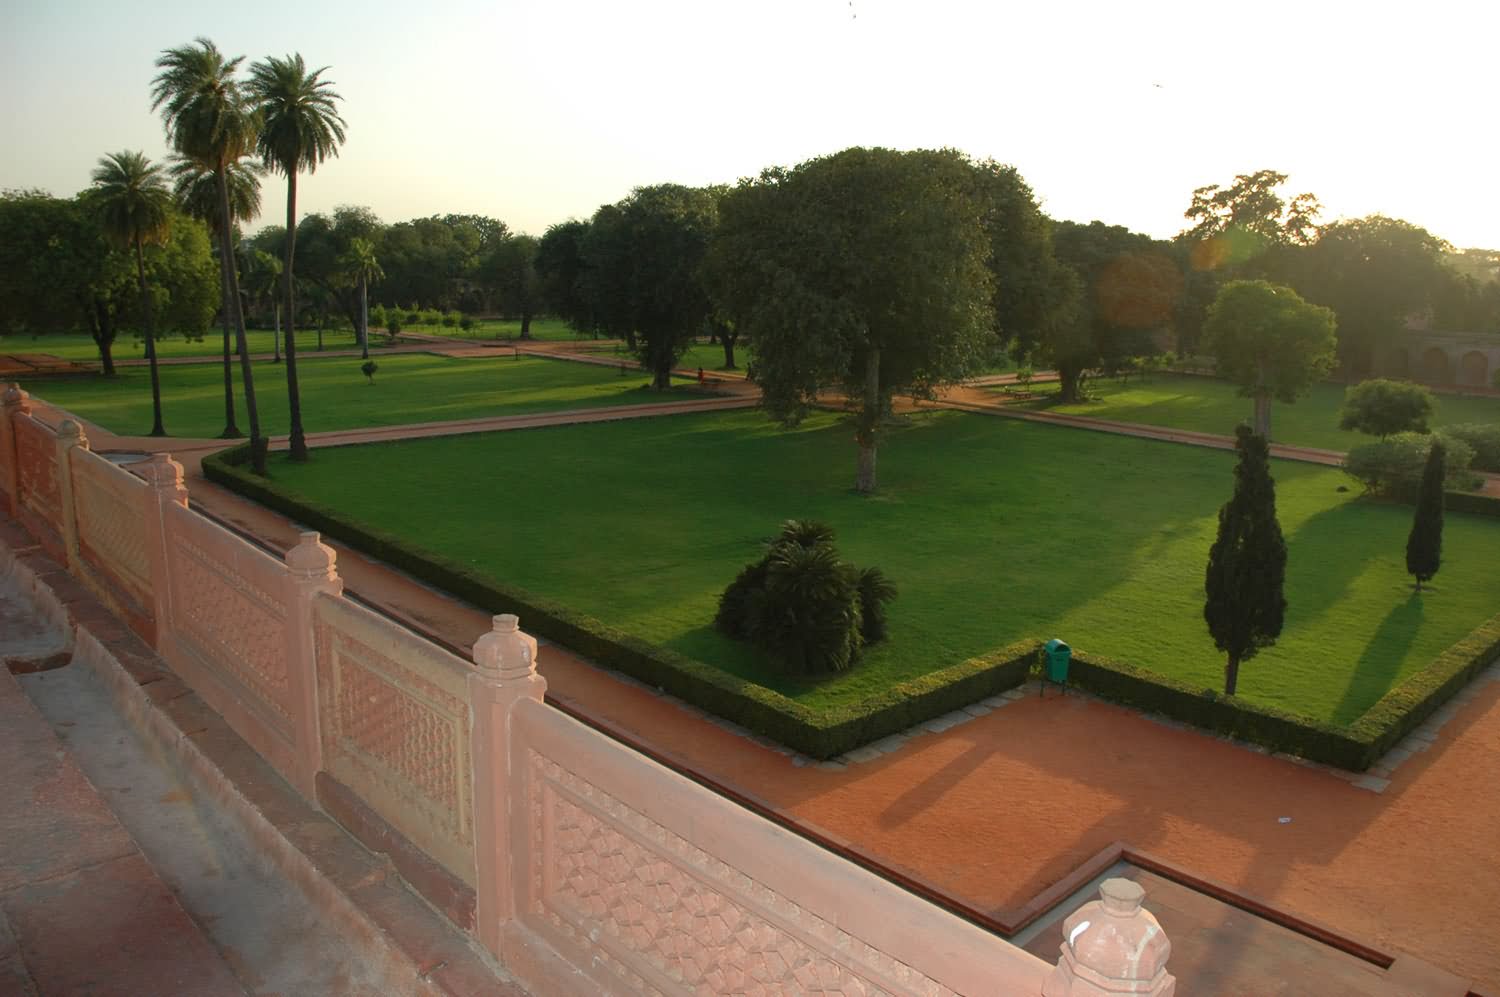 The Perpendicular Angles Of The Charbagh Garden From The Humayun's Tomb